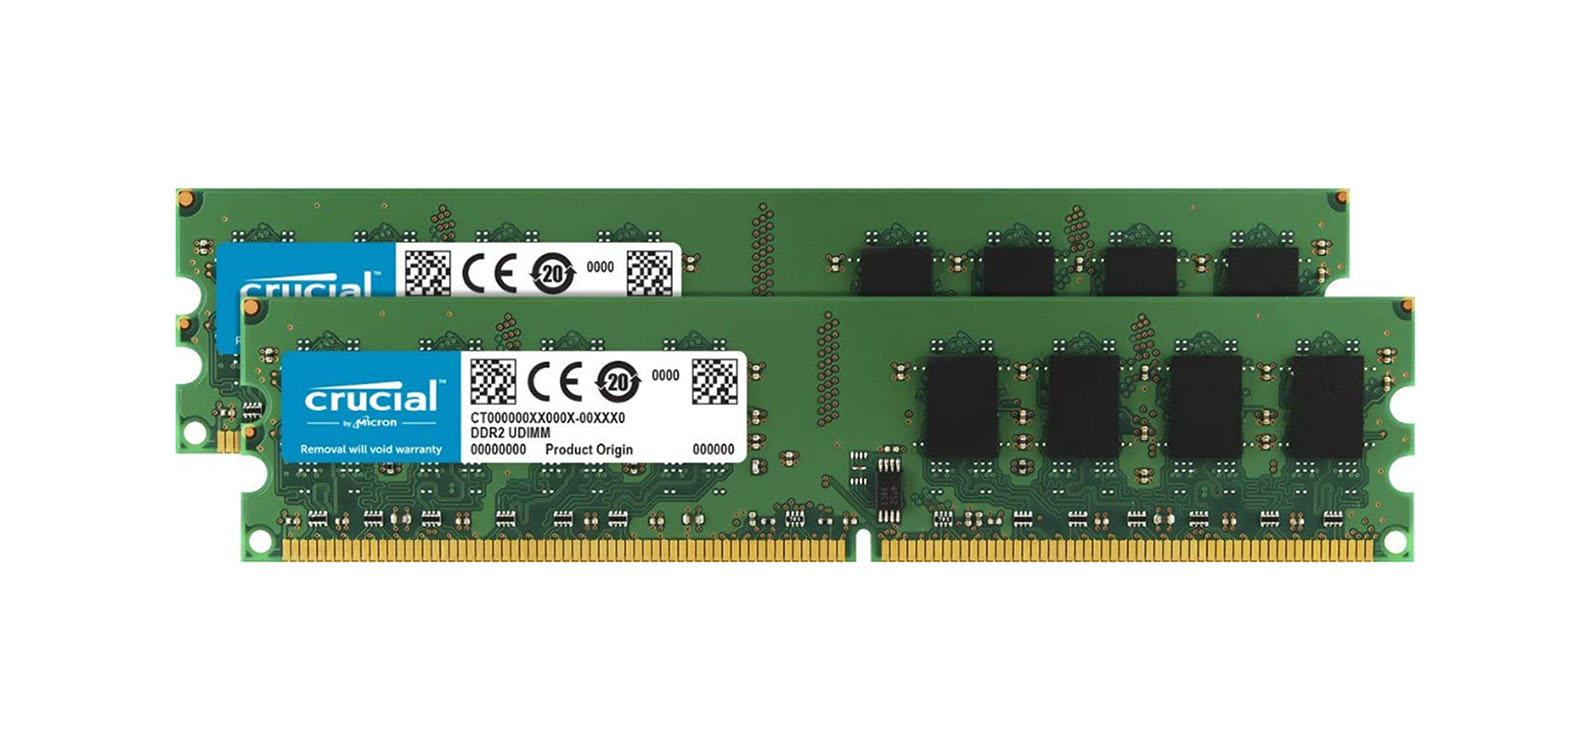 Crucial CT566306 8GB Kit (2 x 4GB) DDR2-667MHz PC2-5300 ECC Fully Buffered CL5 240-Pin DIMM Memory Upgrade for Supermicro SuperServer 6025B-8R+V